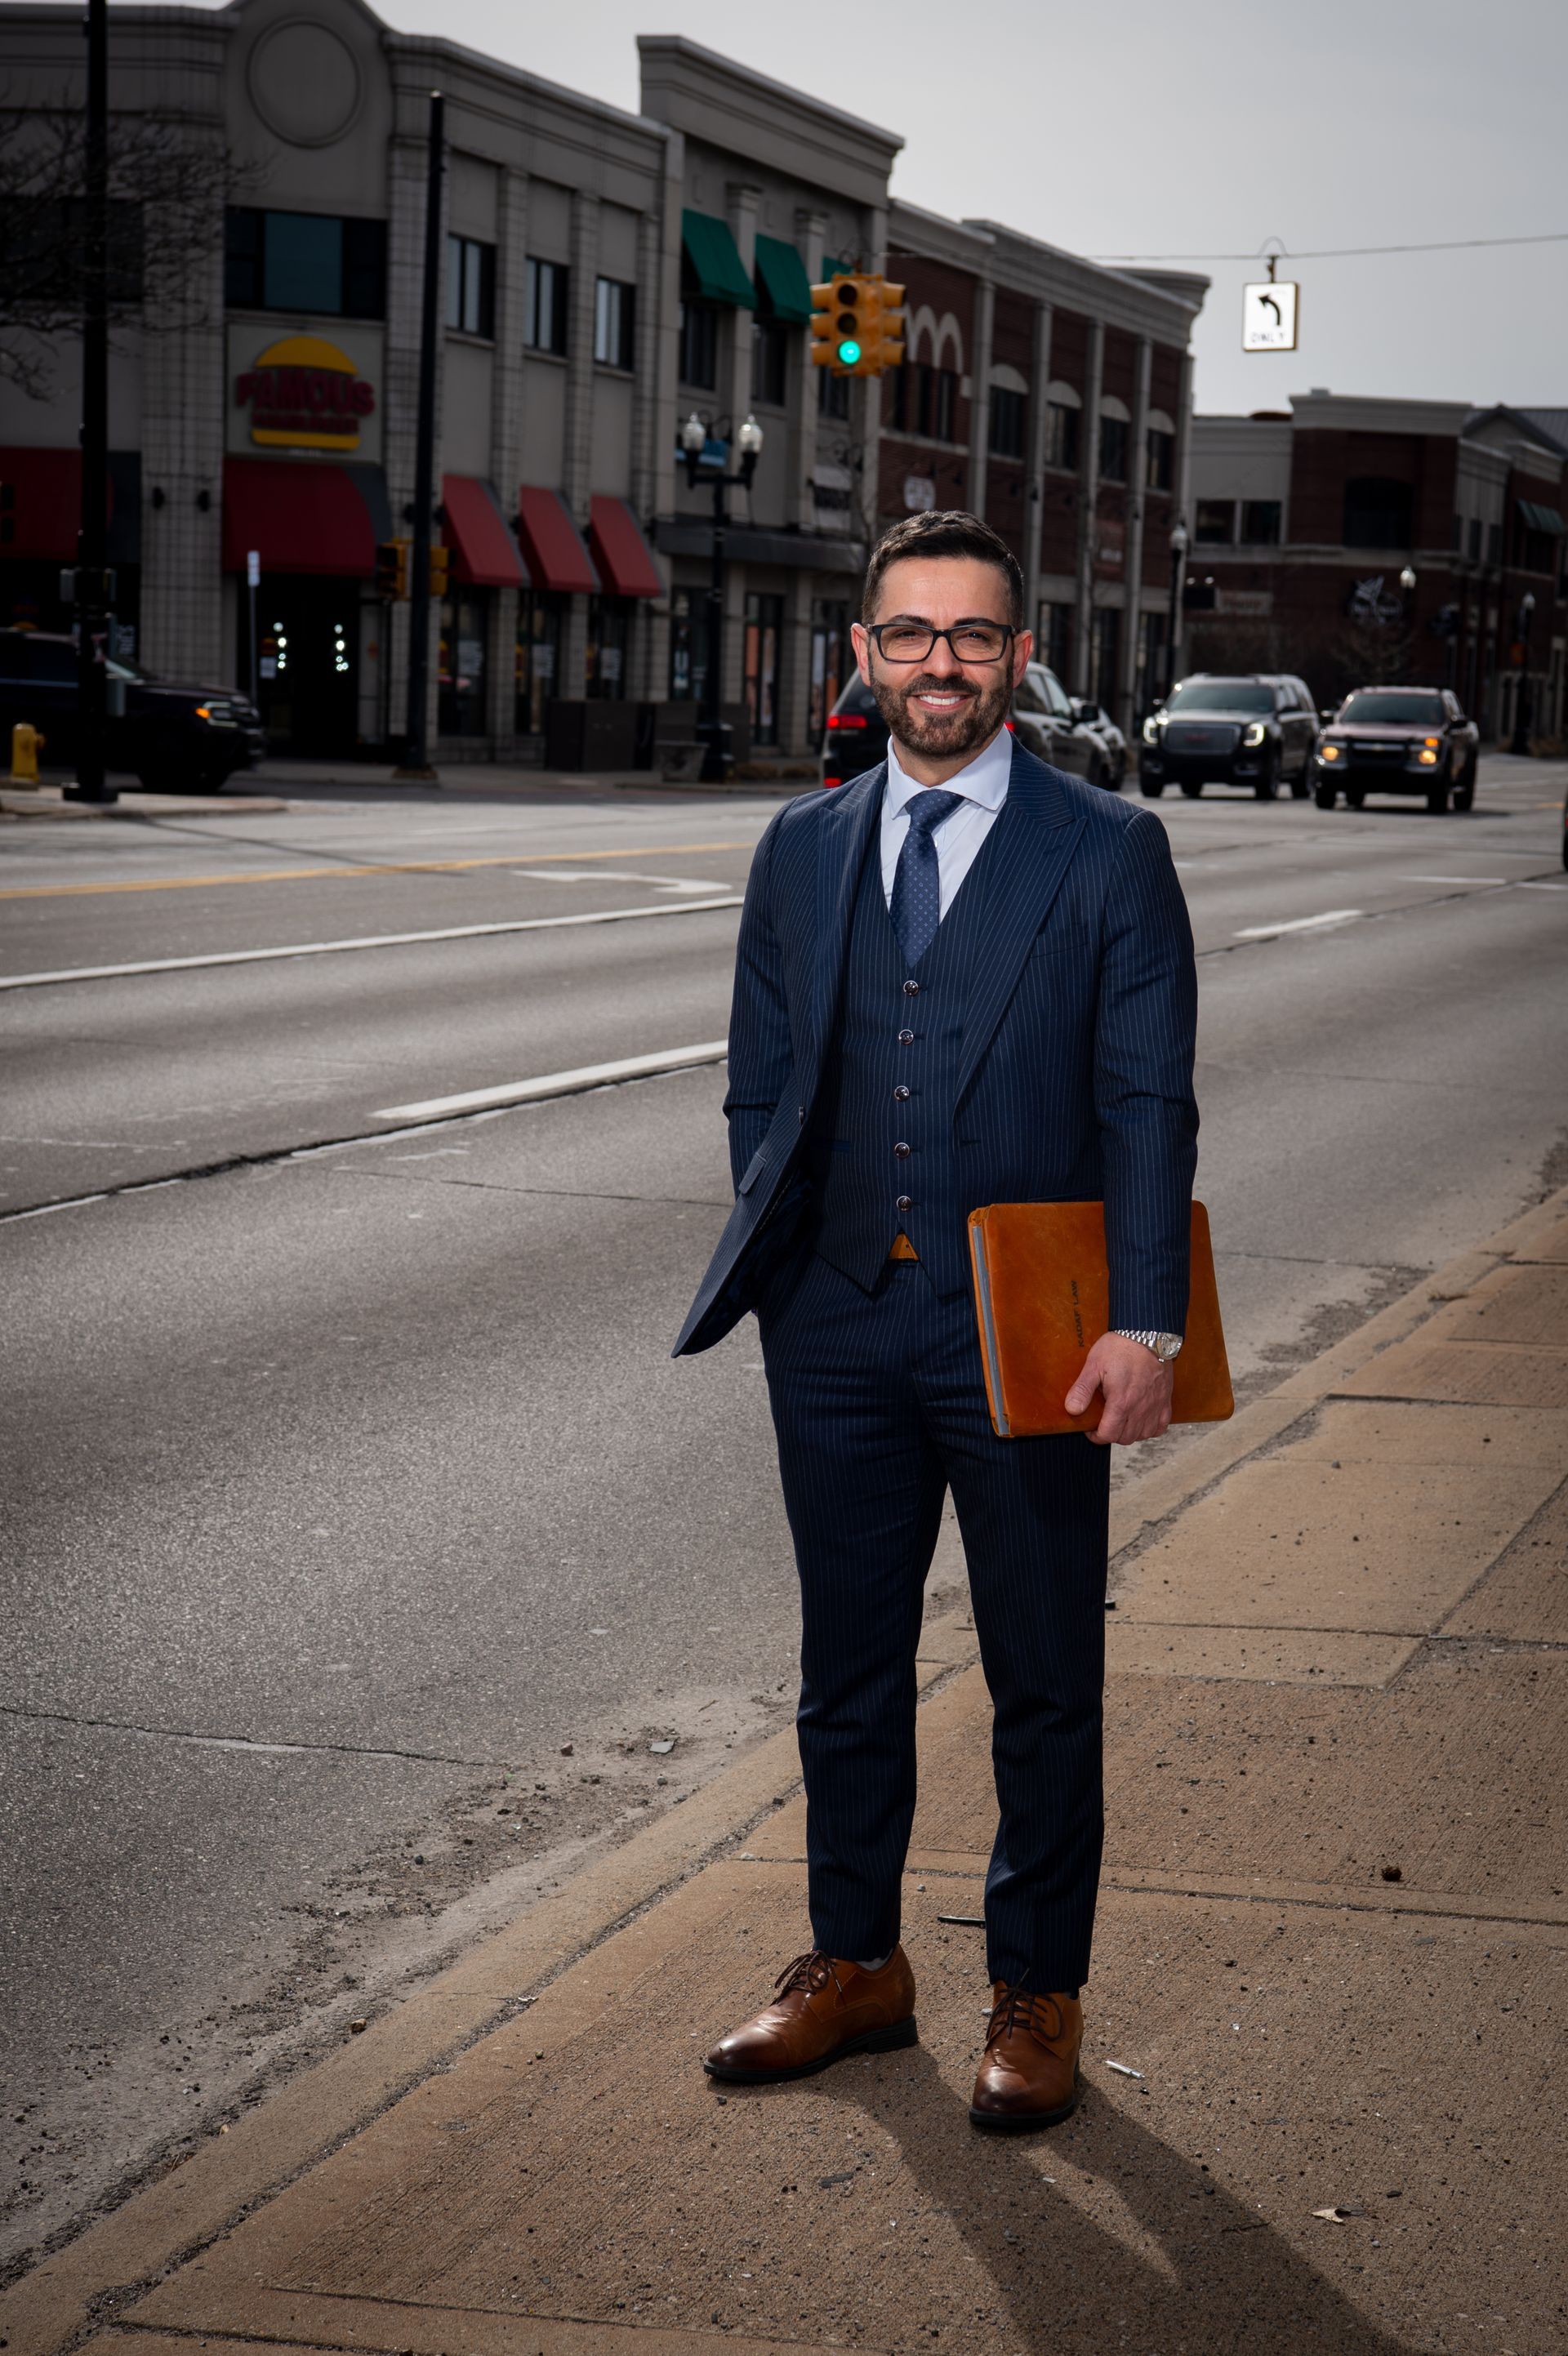 a man in a suit and tie is standing on the sidewalk holding a book .